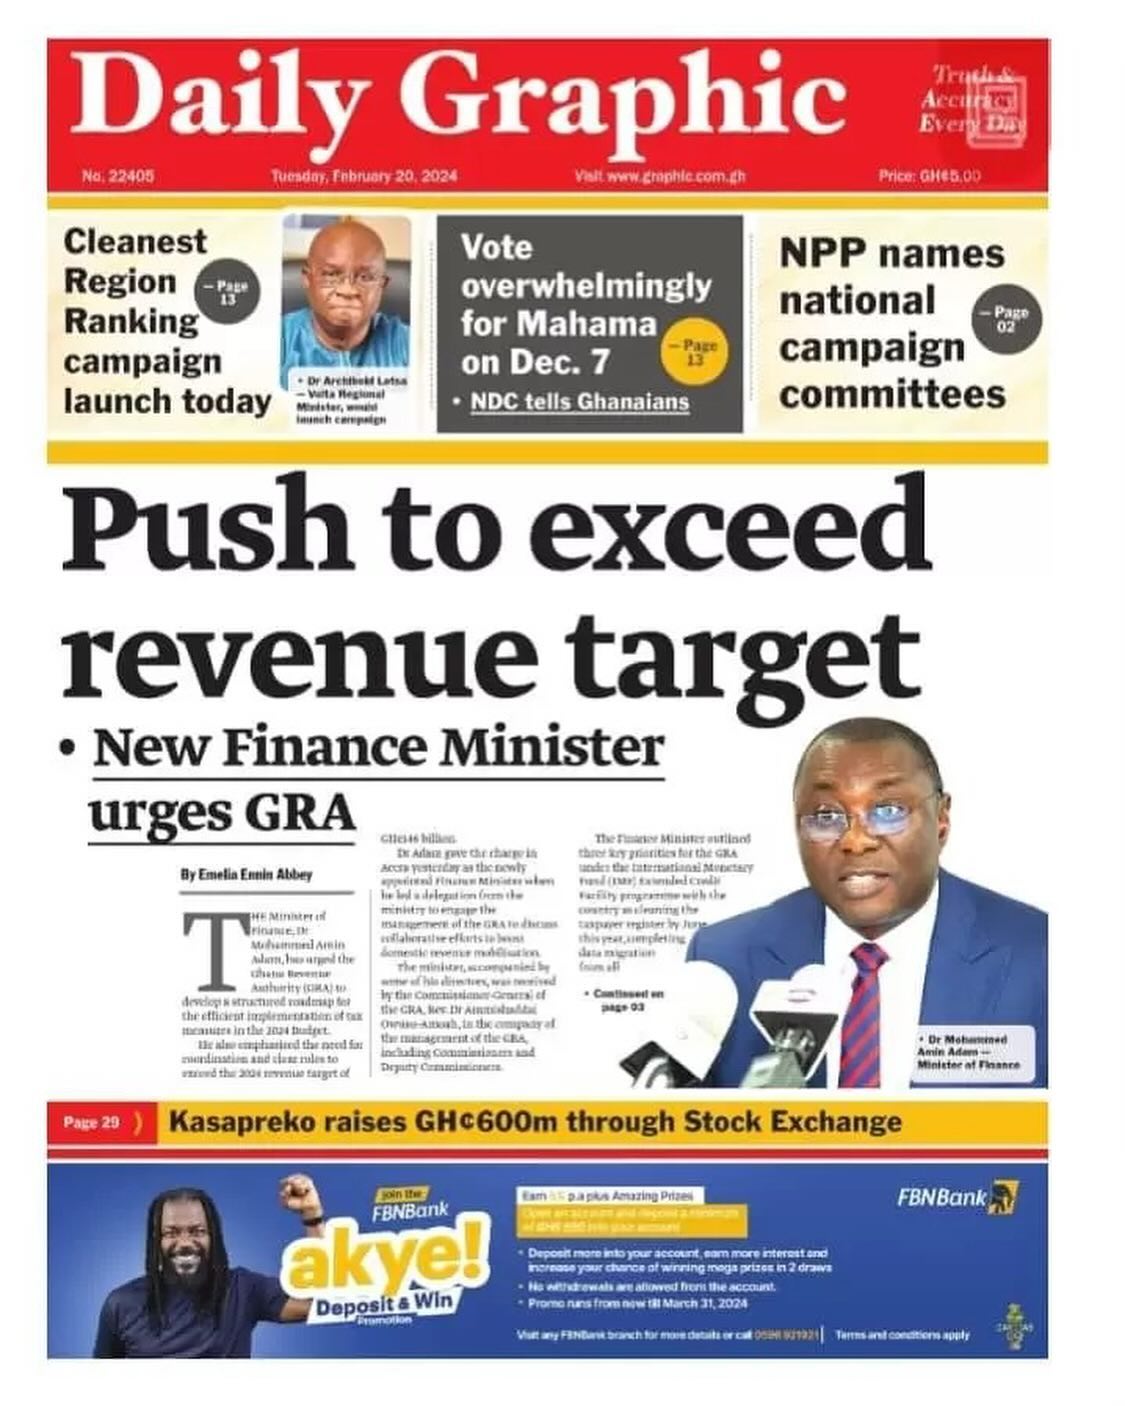 Daily Graphic Newspaper - February 20